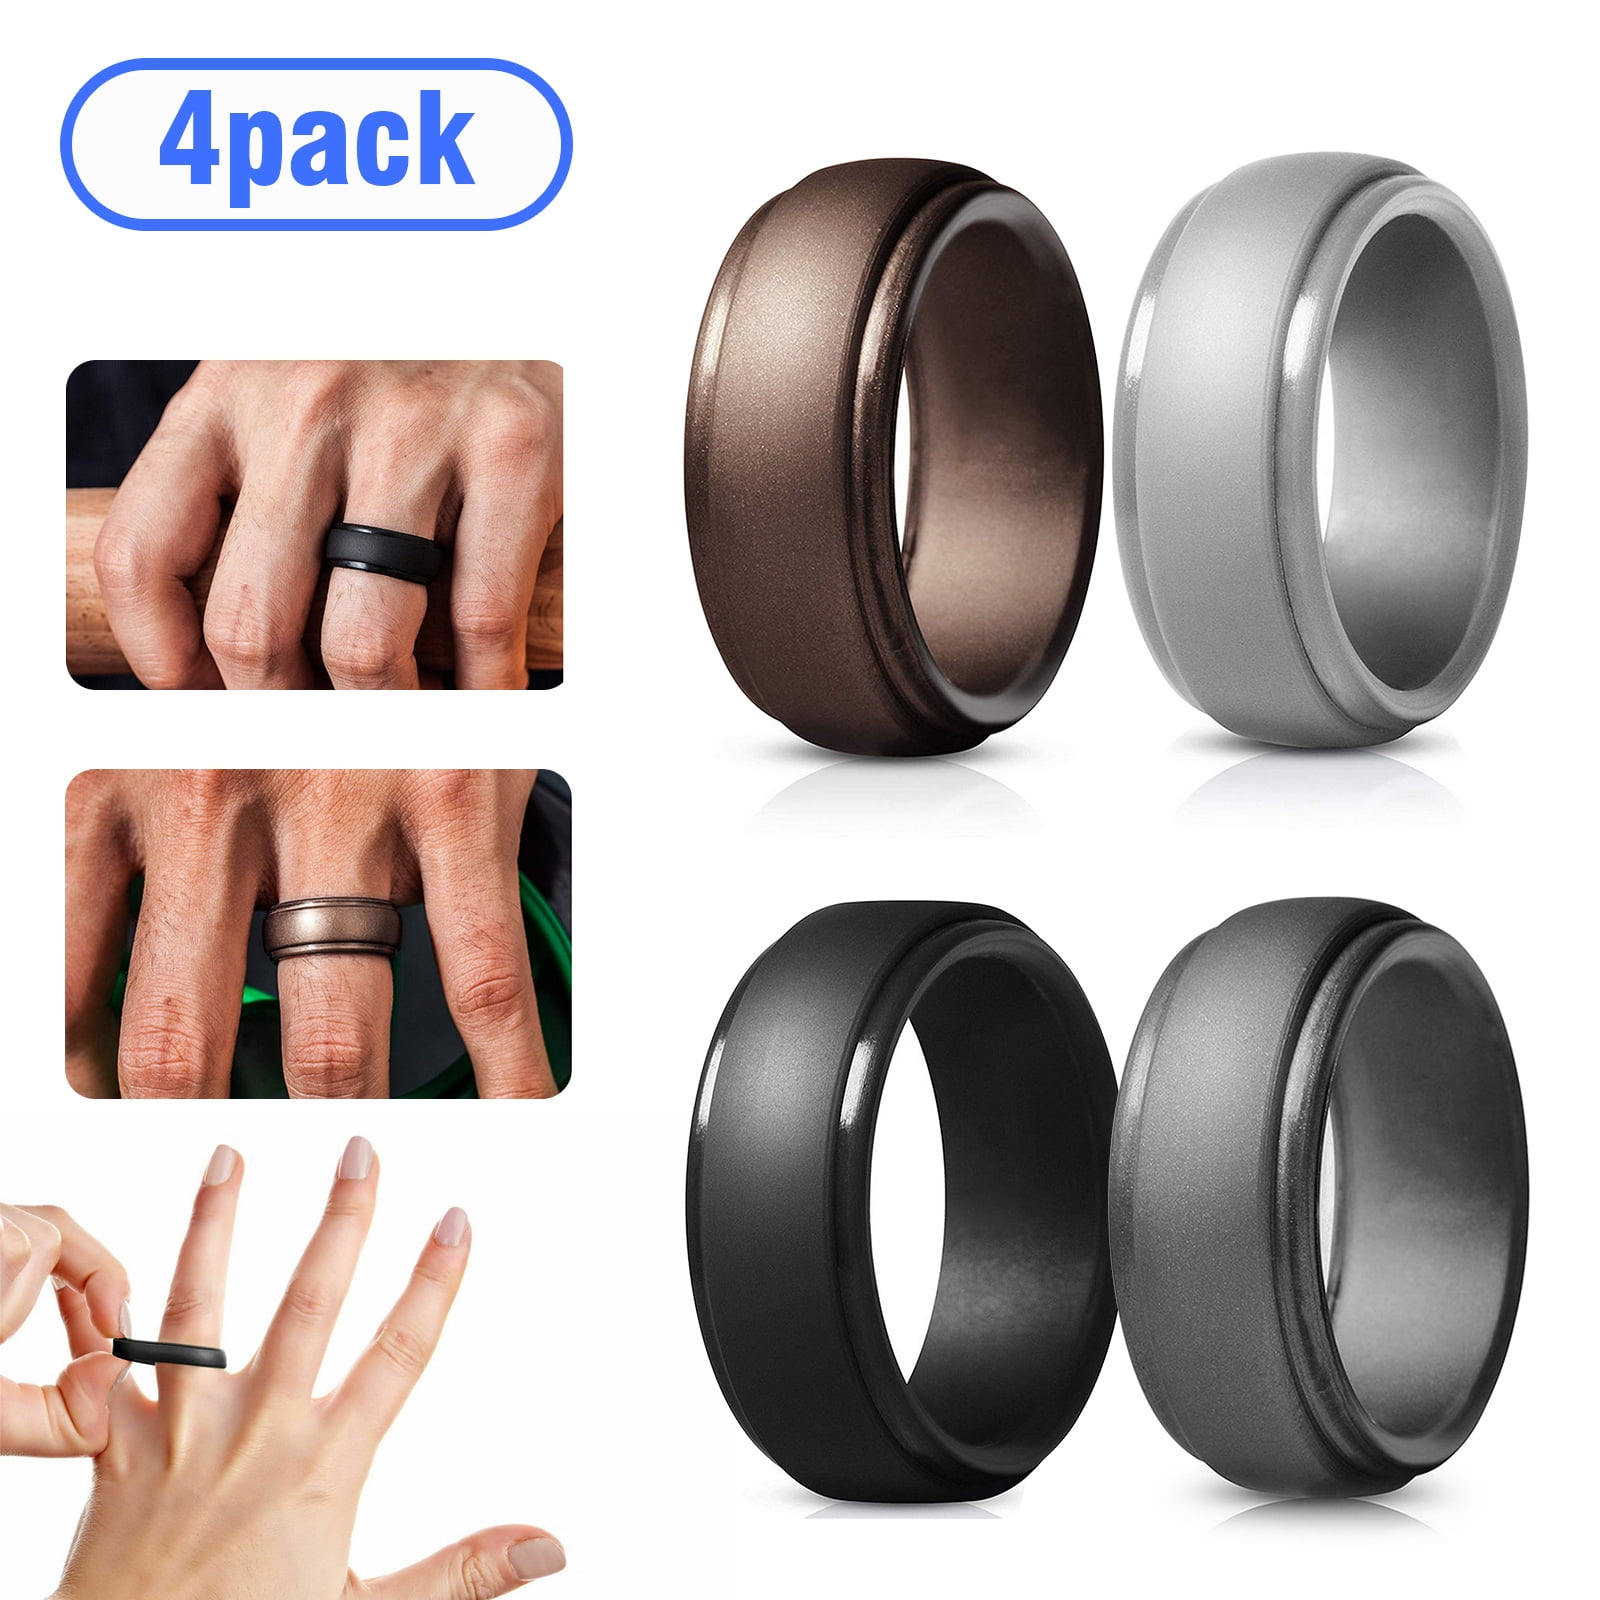 Fitness-5 Colors/set Training 5.5MM Premium Medical Grade Silicone Ring for Yoga YC Hongda Womens Silicone Wedding Ring Bands Outdoor Exercise,Baby Care